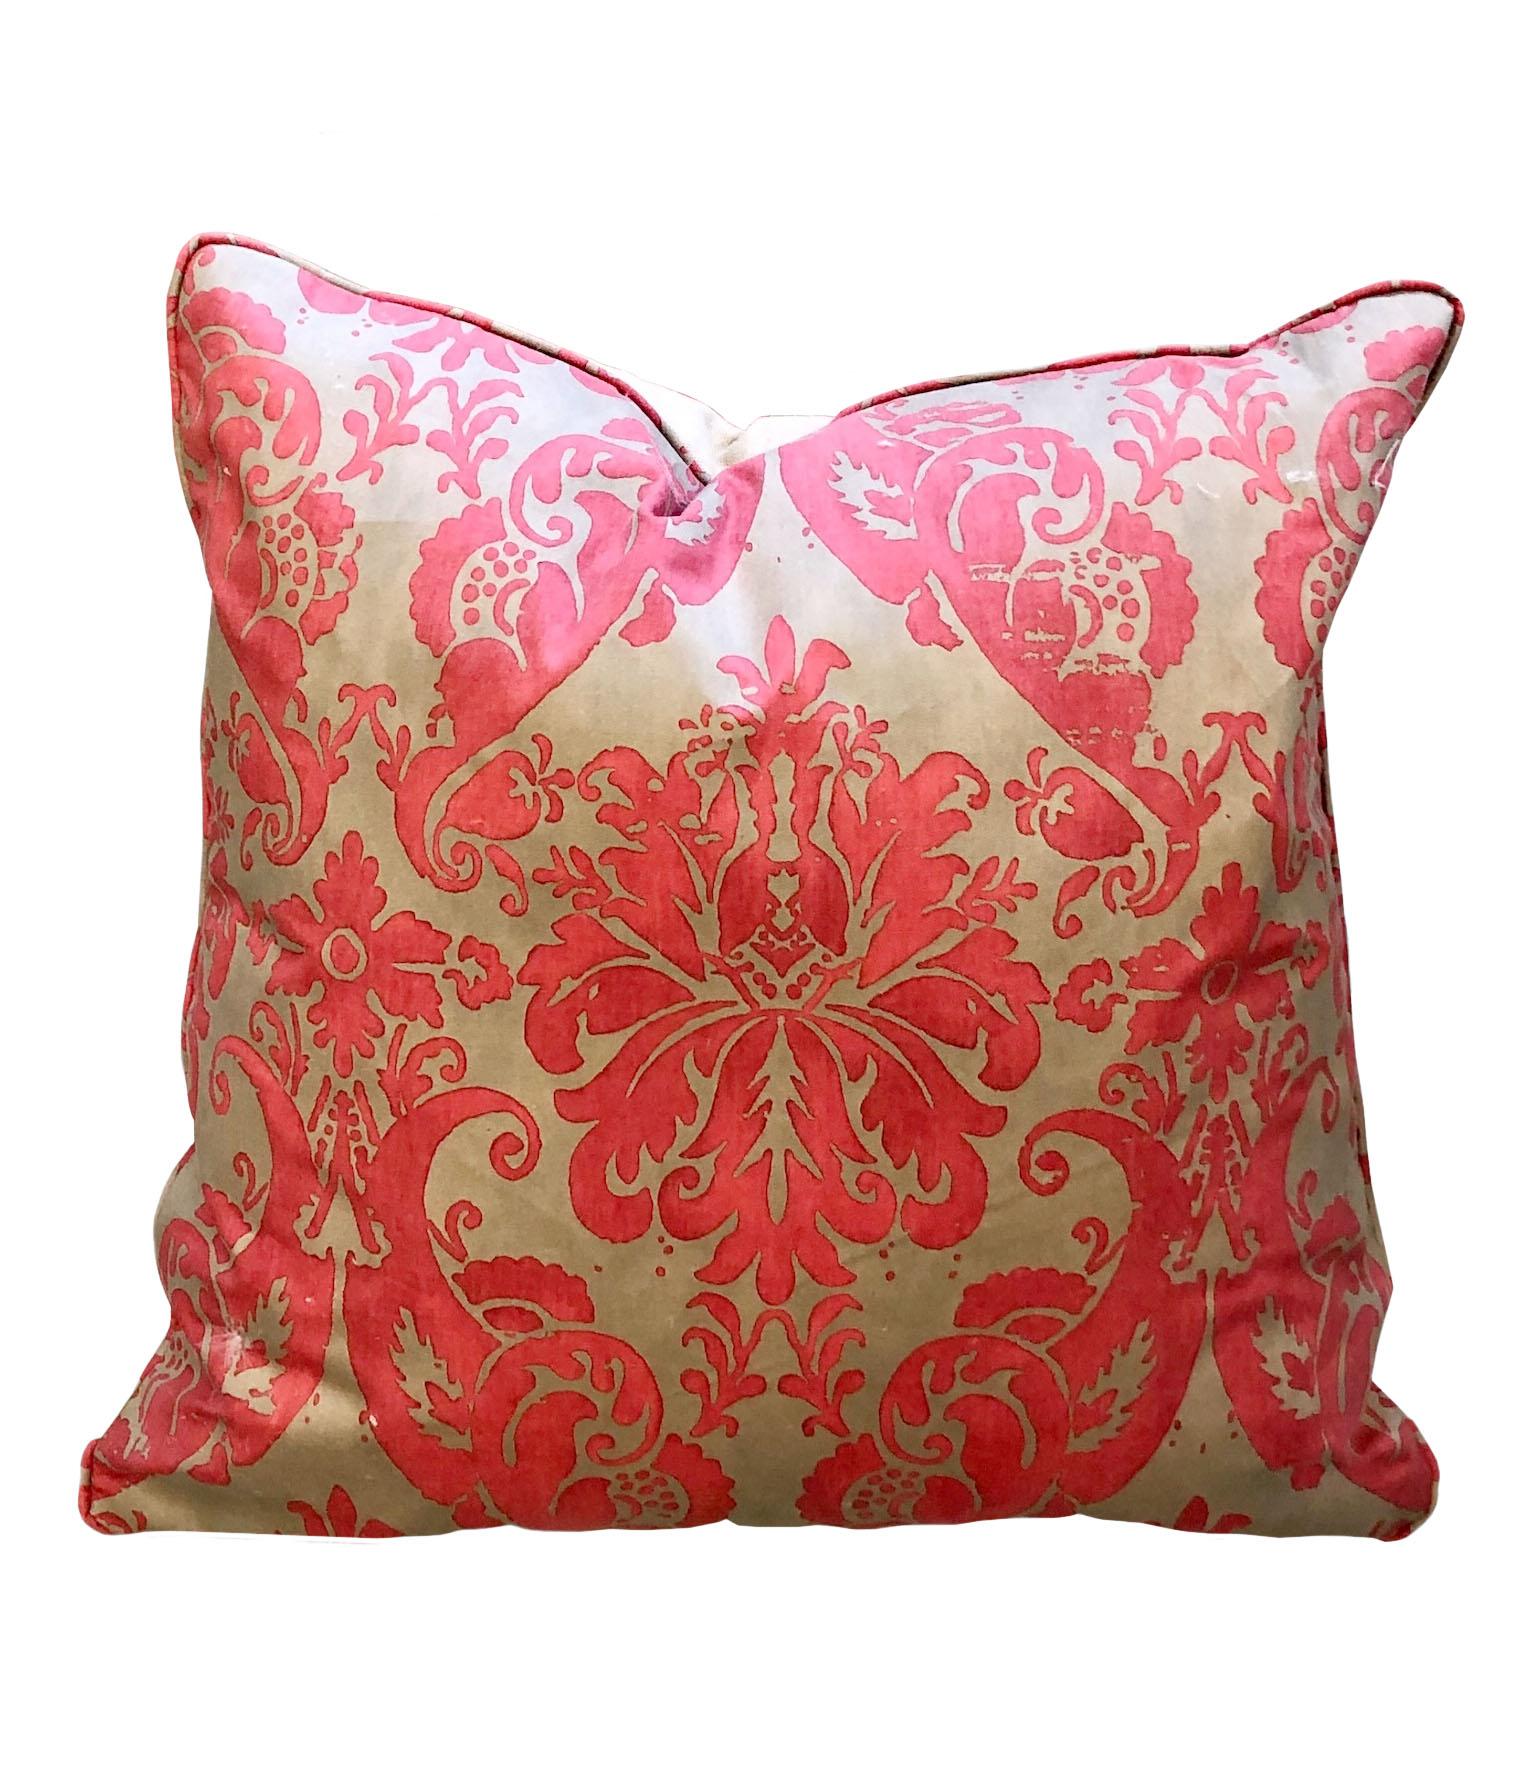 Mid-20th Century Italian Pink Fortuny Pillows, a Pair